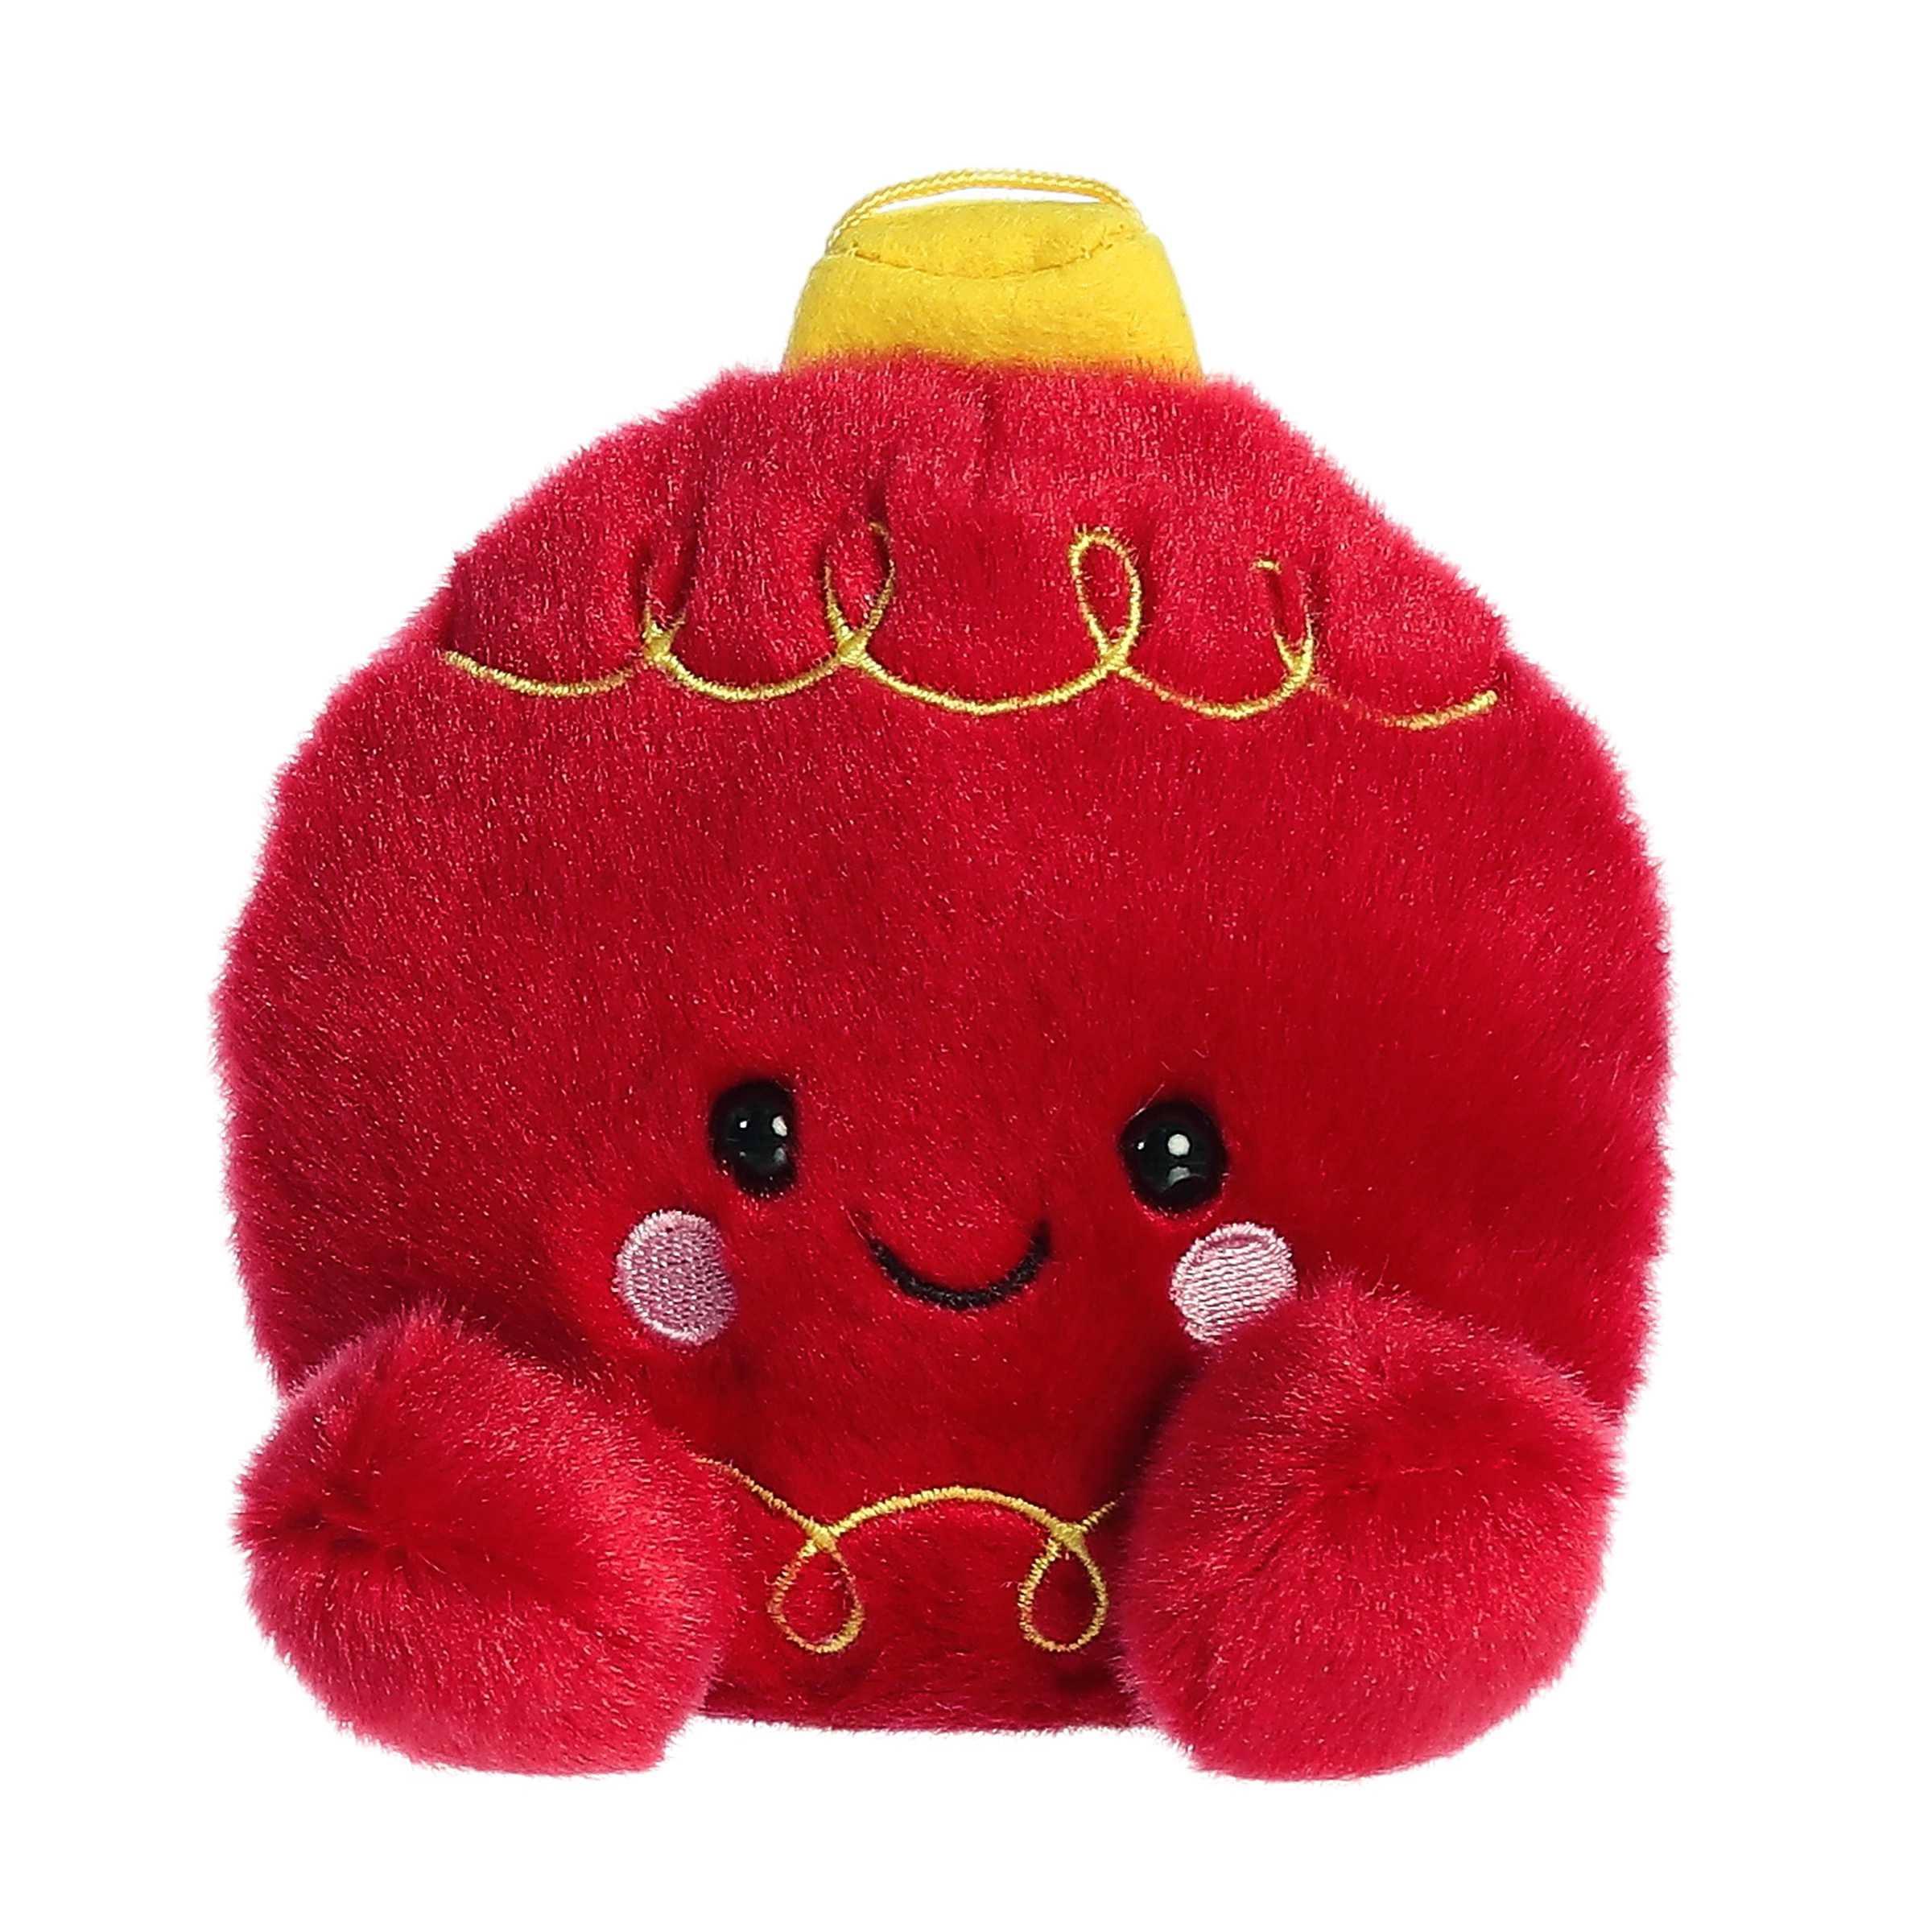 Adorable, happy, mini red ornament plush toy sitting with yellow decoration and accents